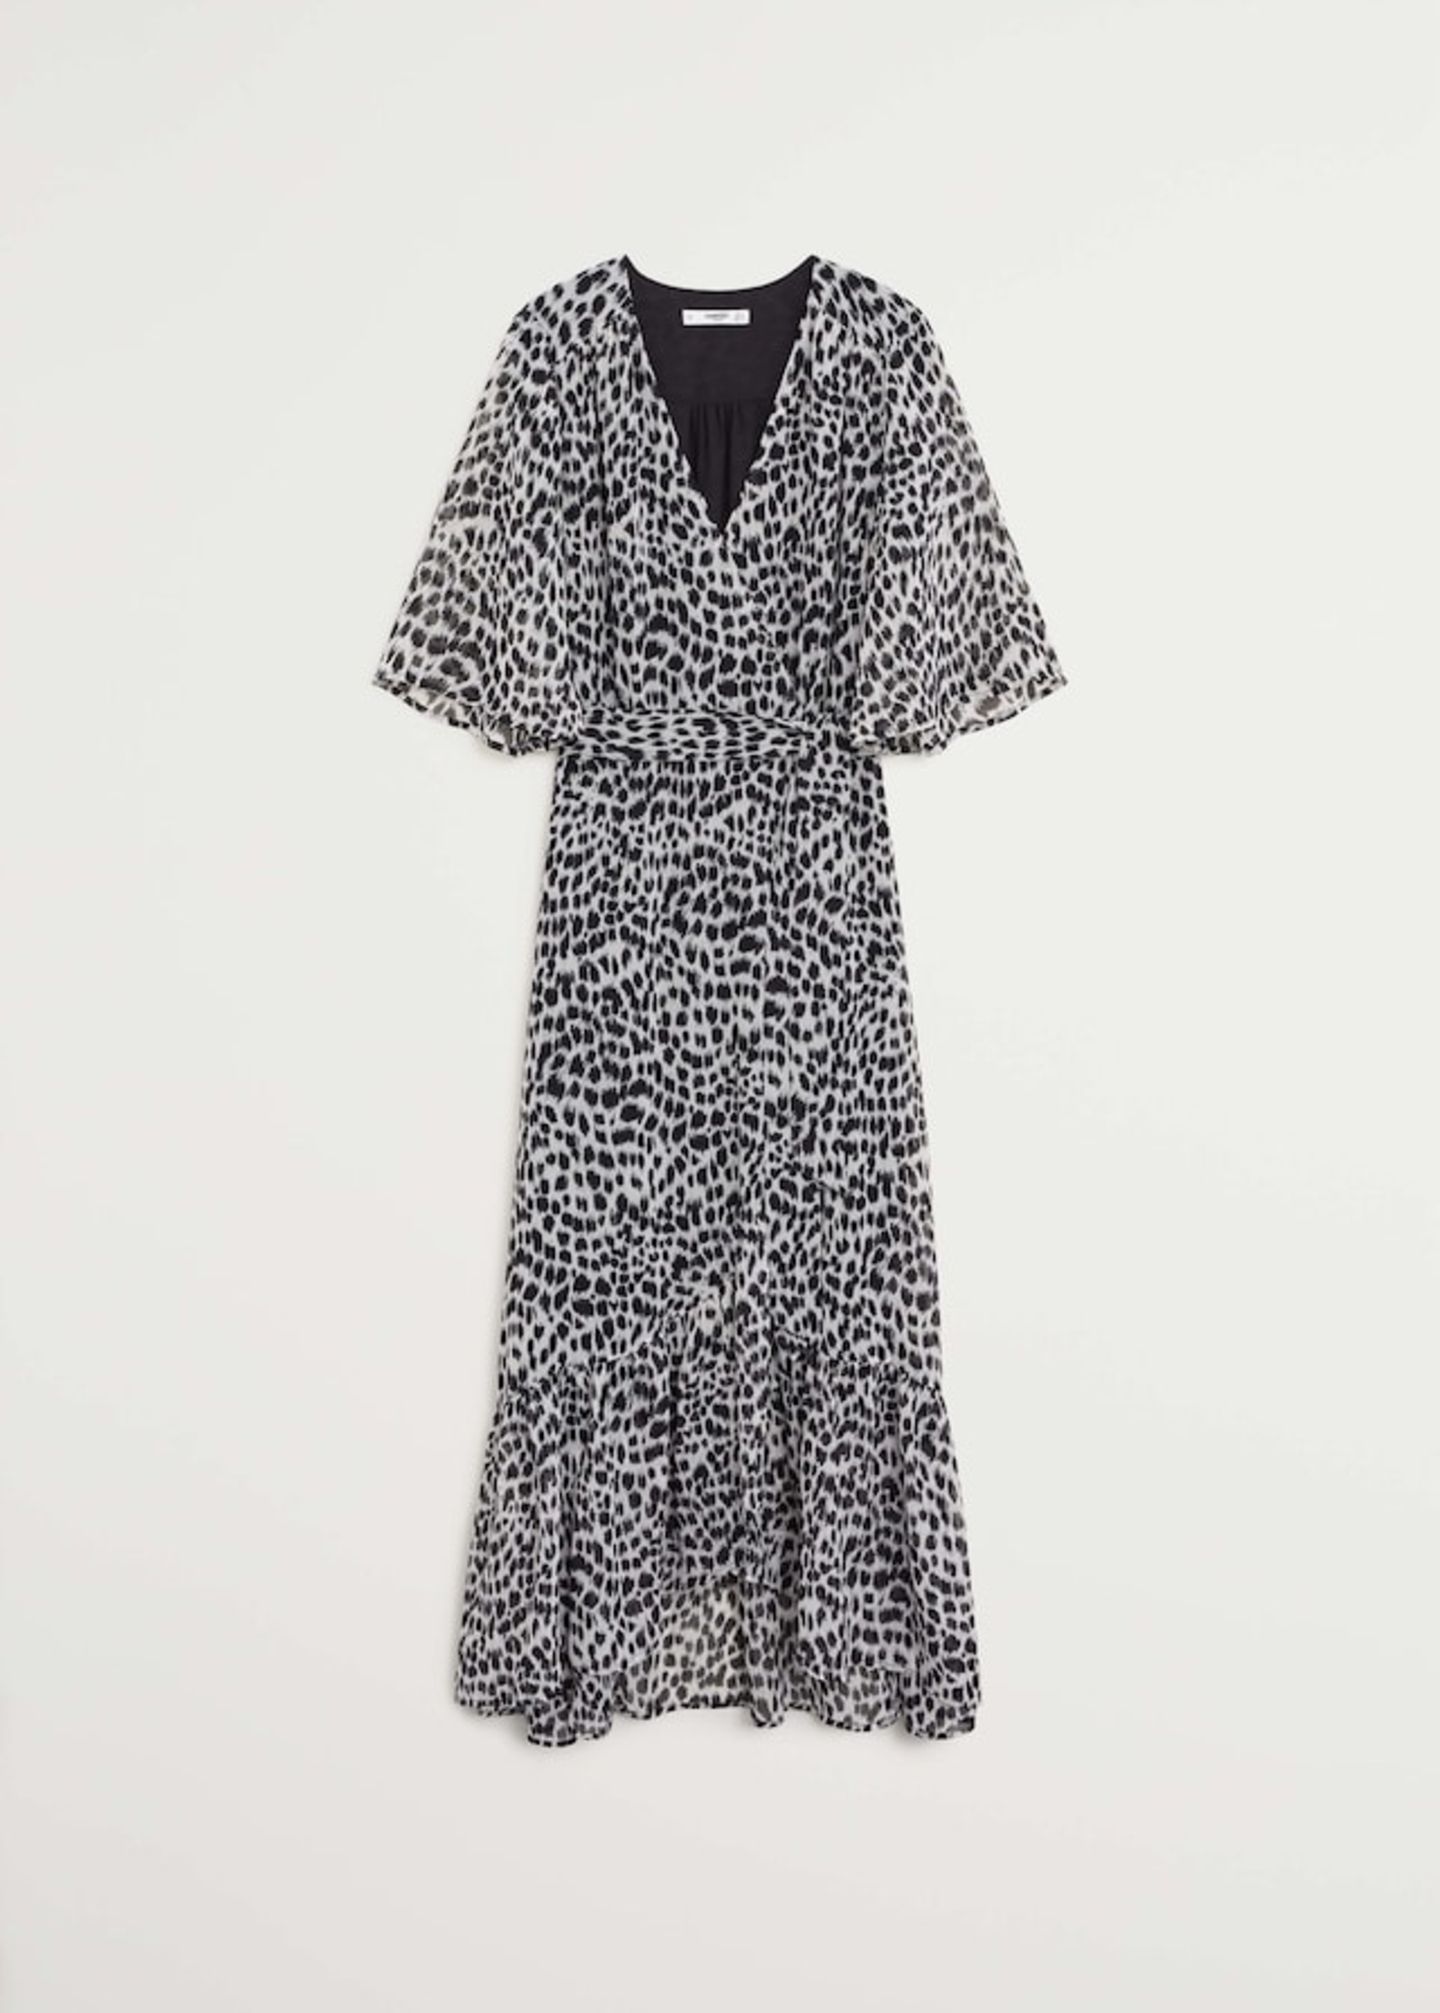 Will Leo one day disappear from the fashion scene? We hope not too soon and at least this autumn, the popular print will still be able to decorate our wardrobe (and us!). In any case, this wrap dress is too beautiful not to wear. From Mango, around 50 euros. "Loading =" eager